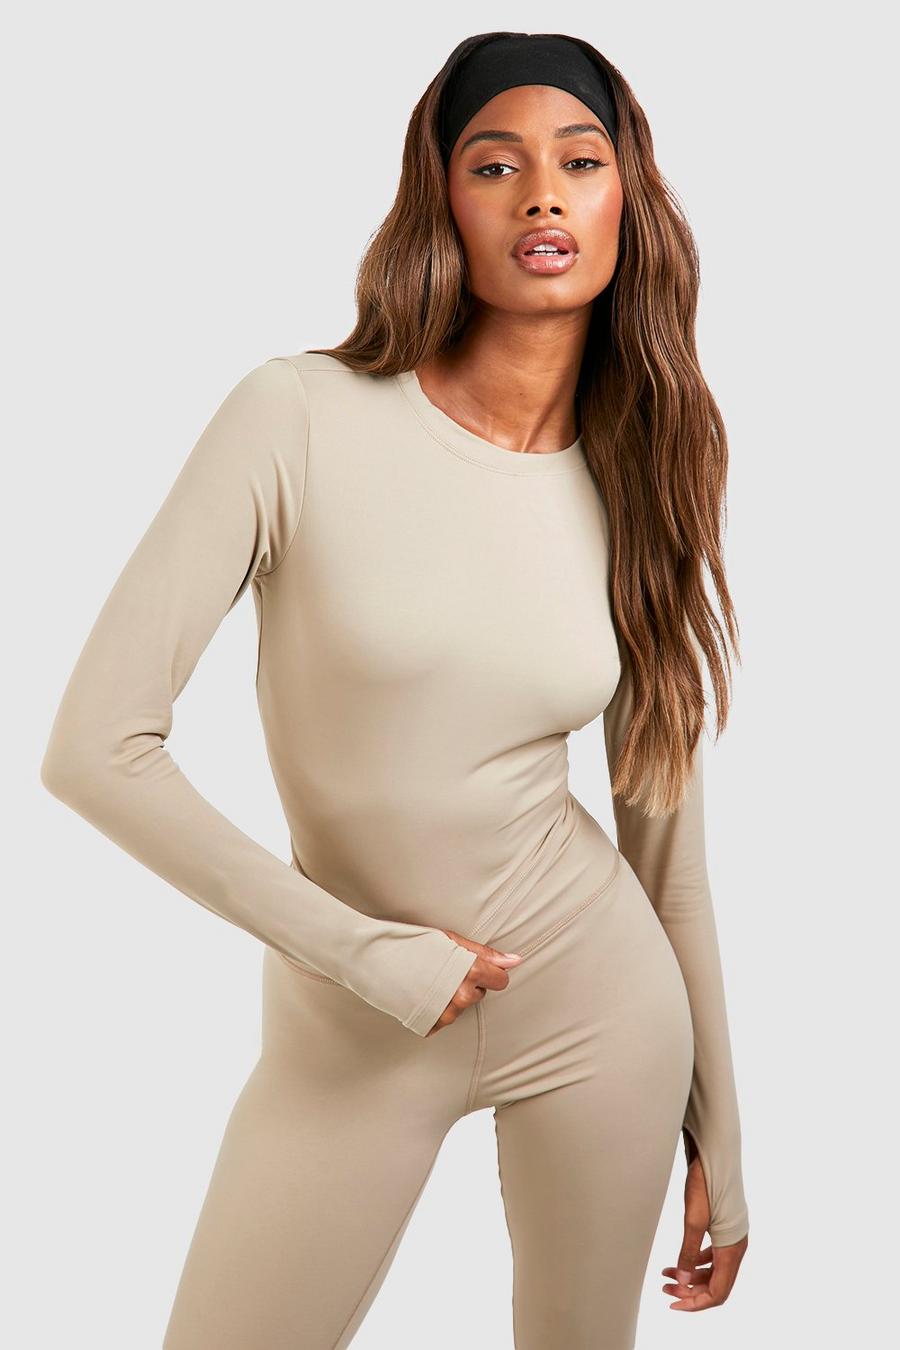 Stone DSGN Studio Supersoft Peached Sculpt Long Sleeve Top